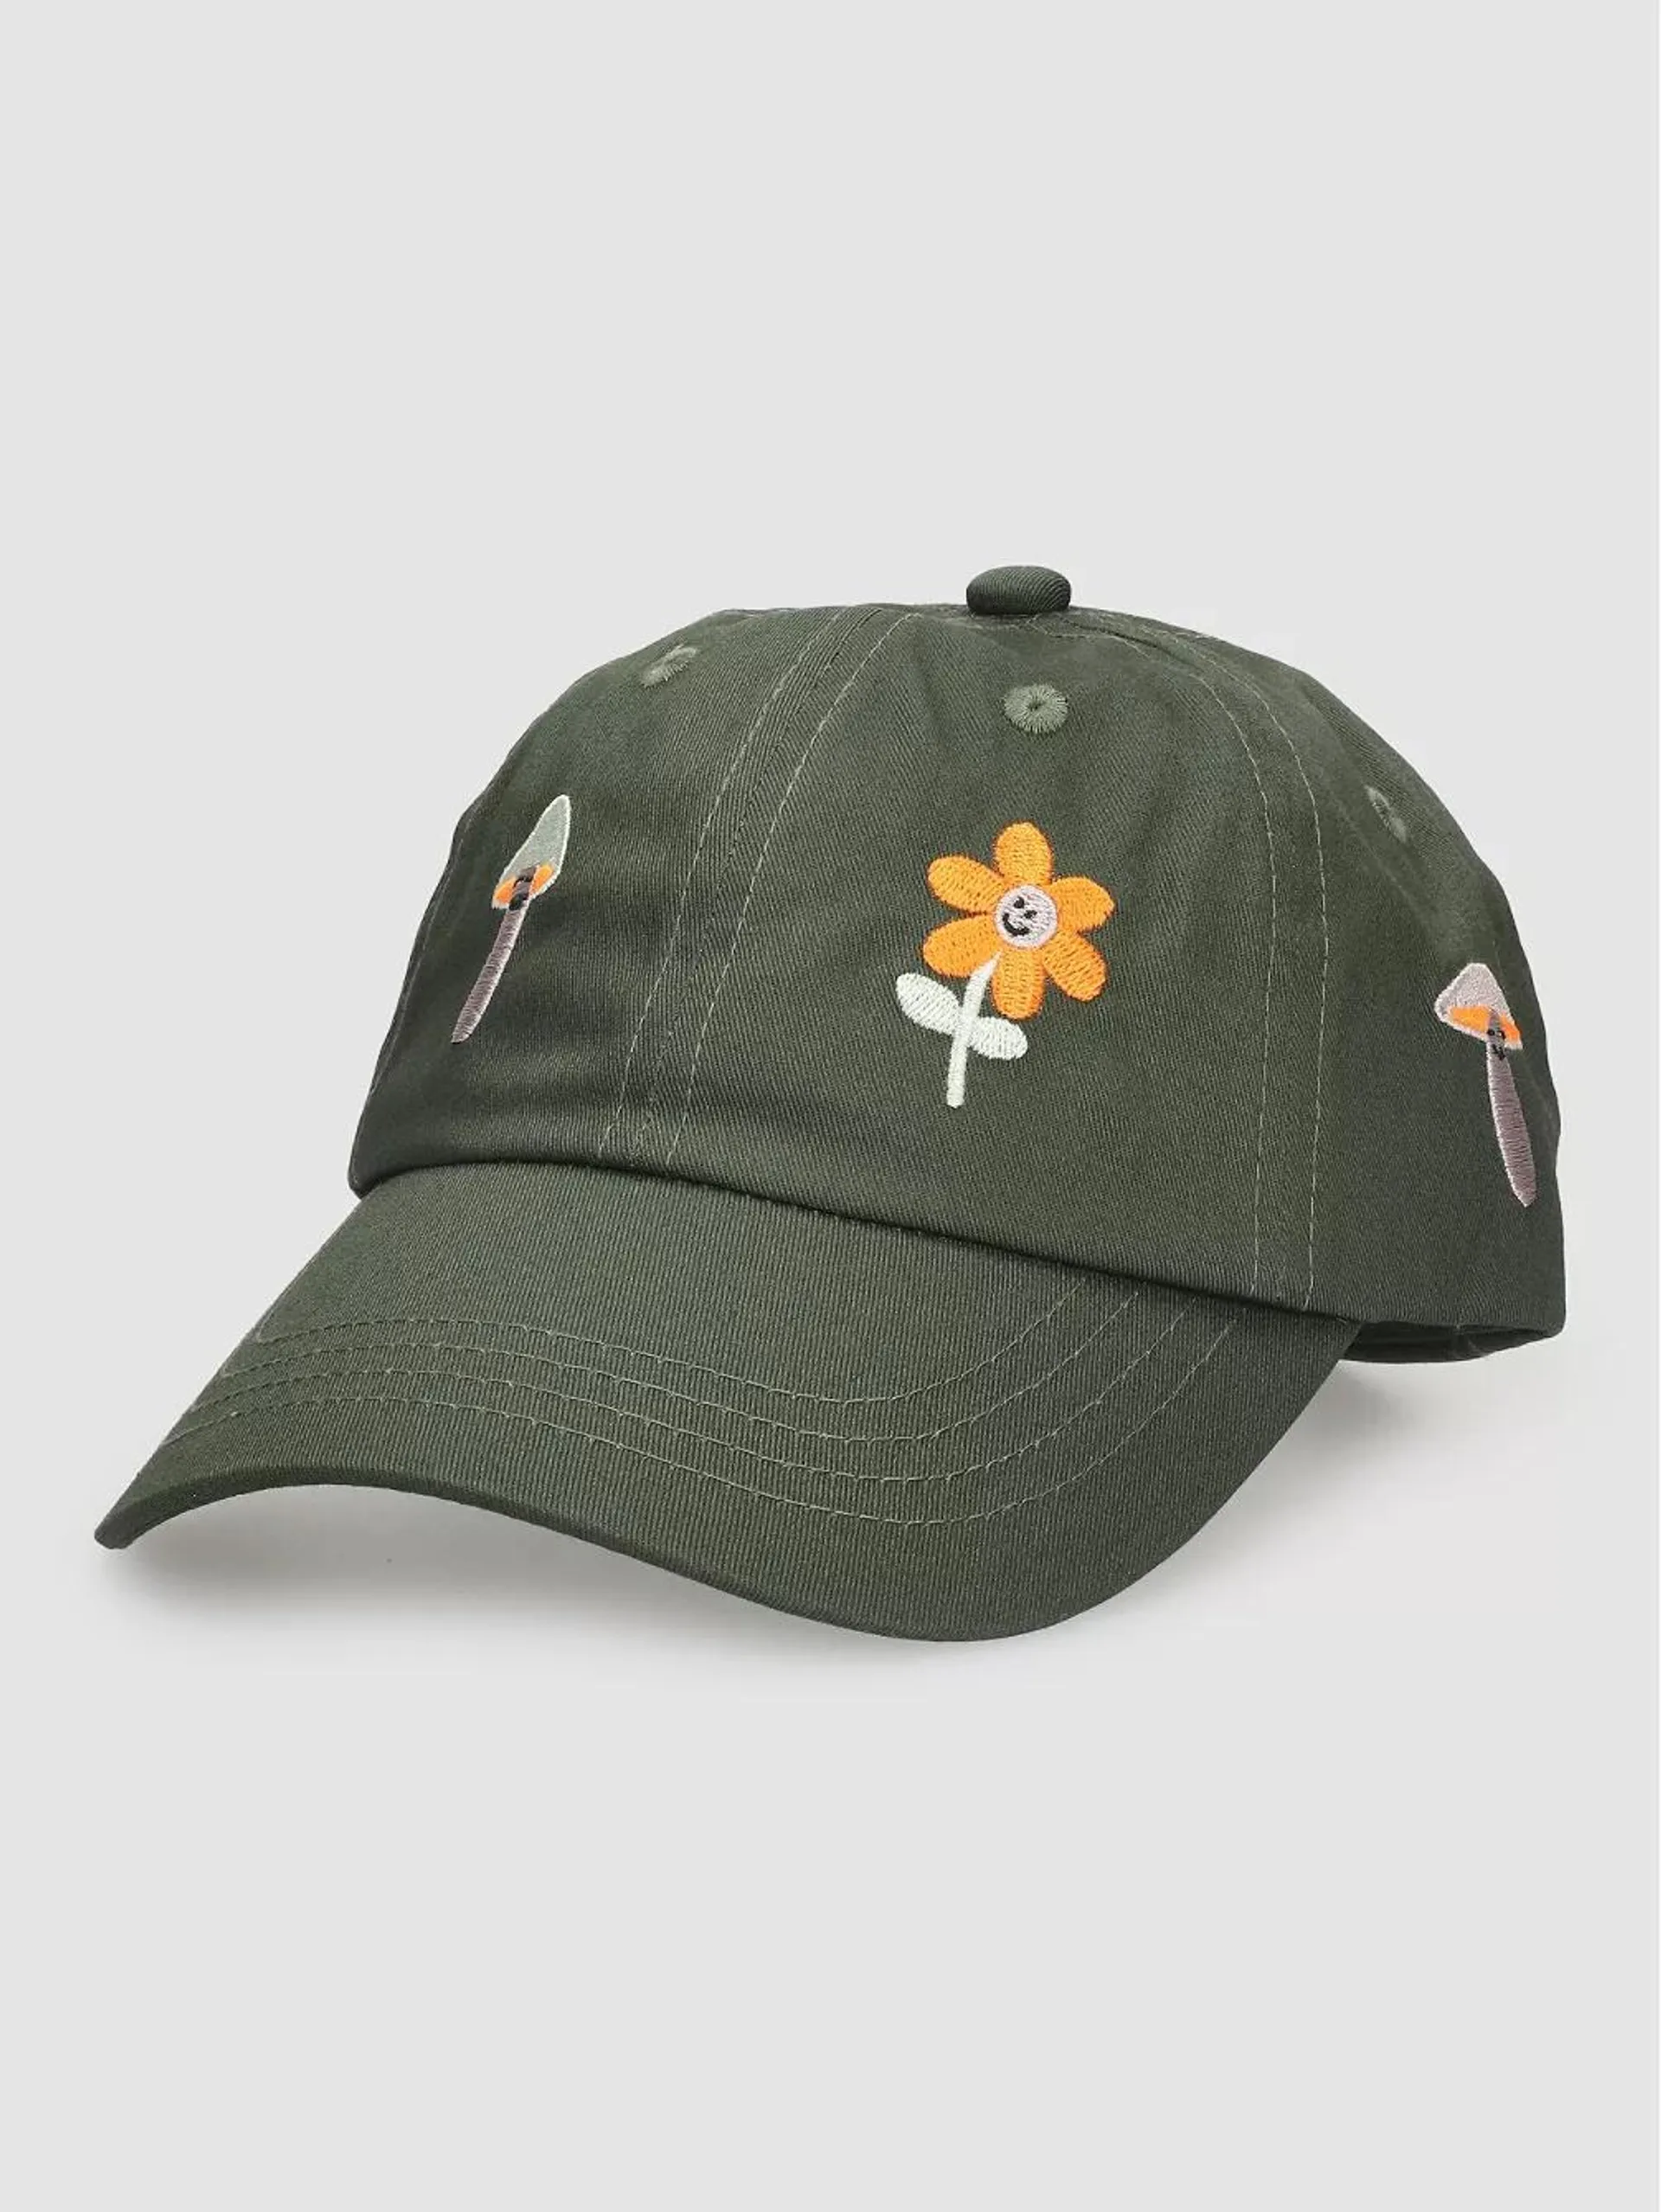 A.Lab Day Hike Cap